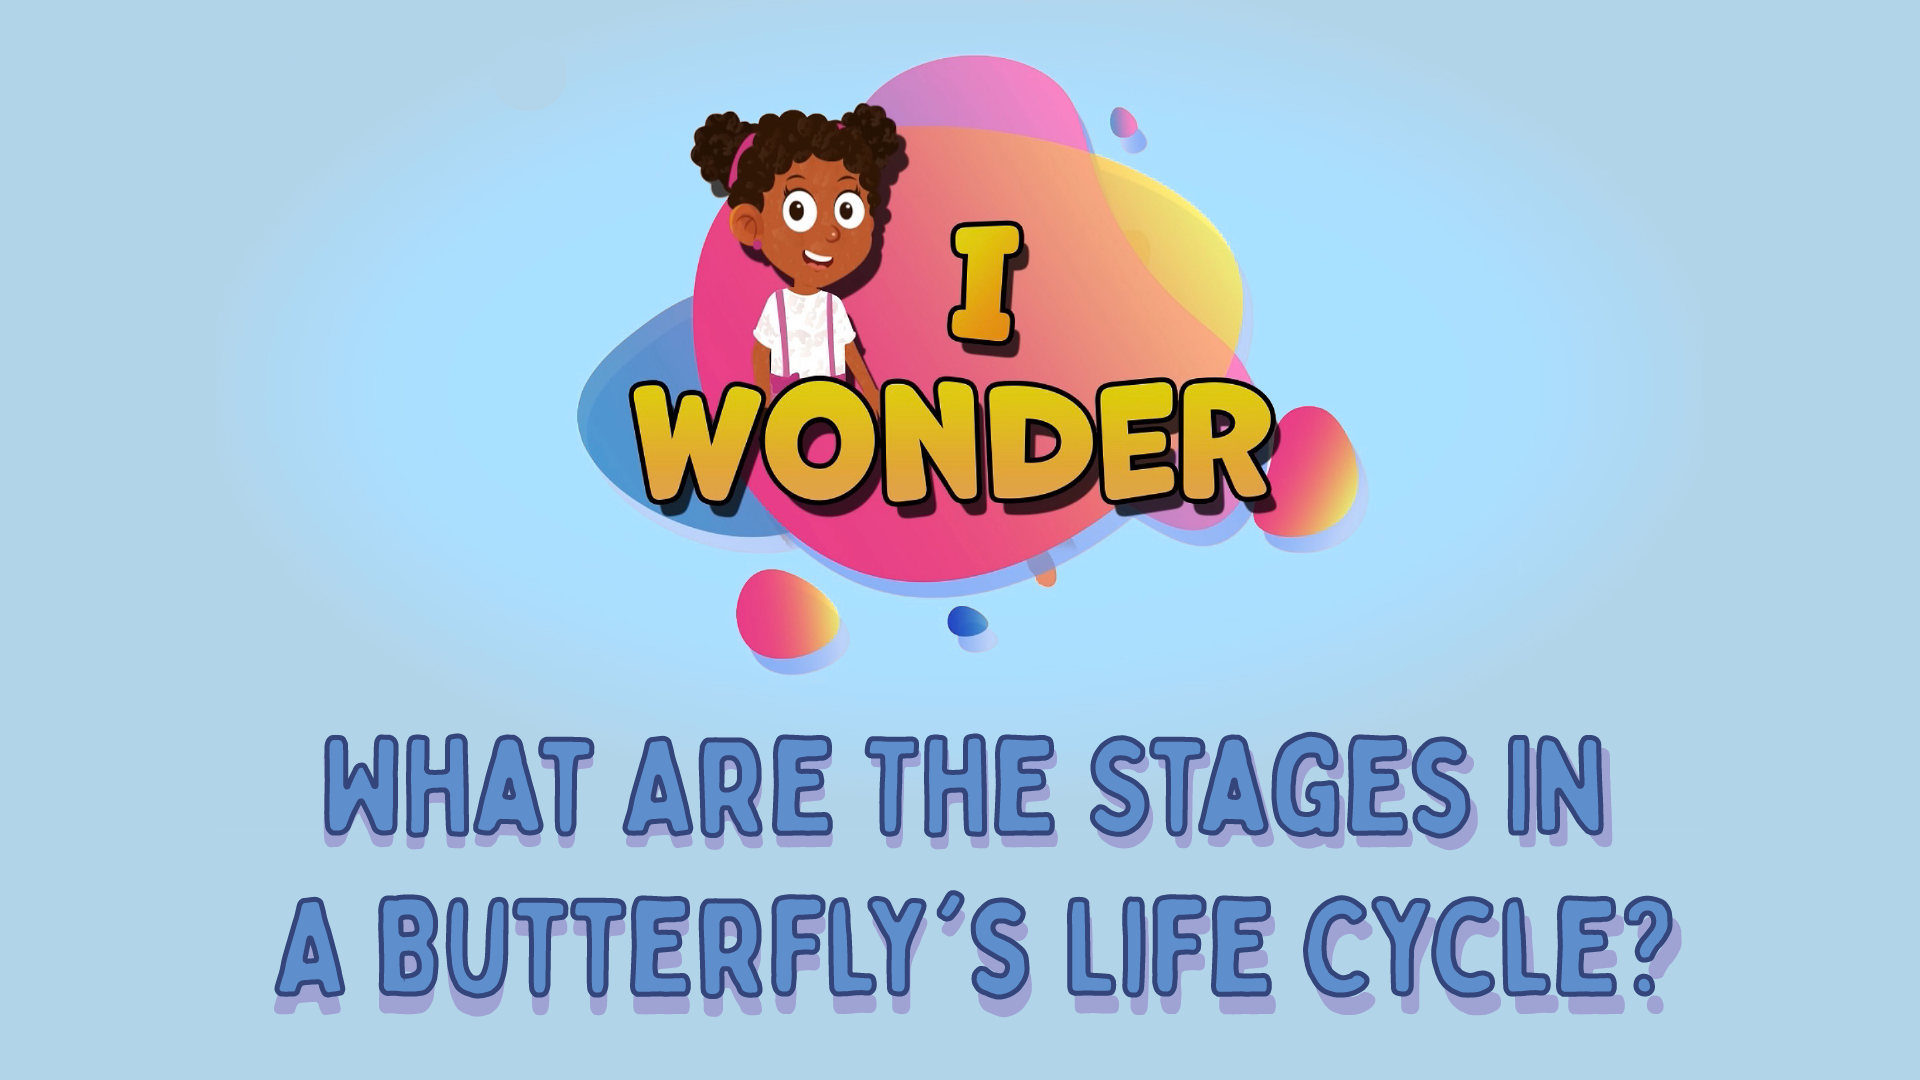 What Are The Stages In A Butterfly’s Life Cycle?